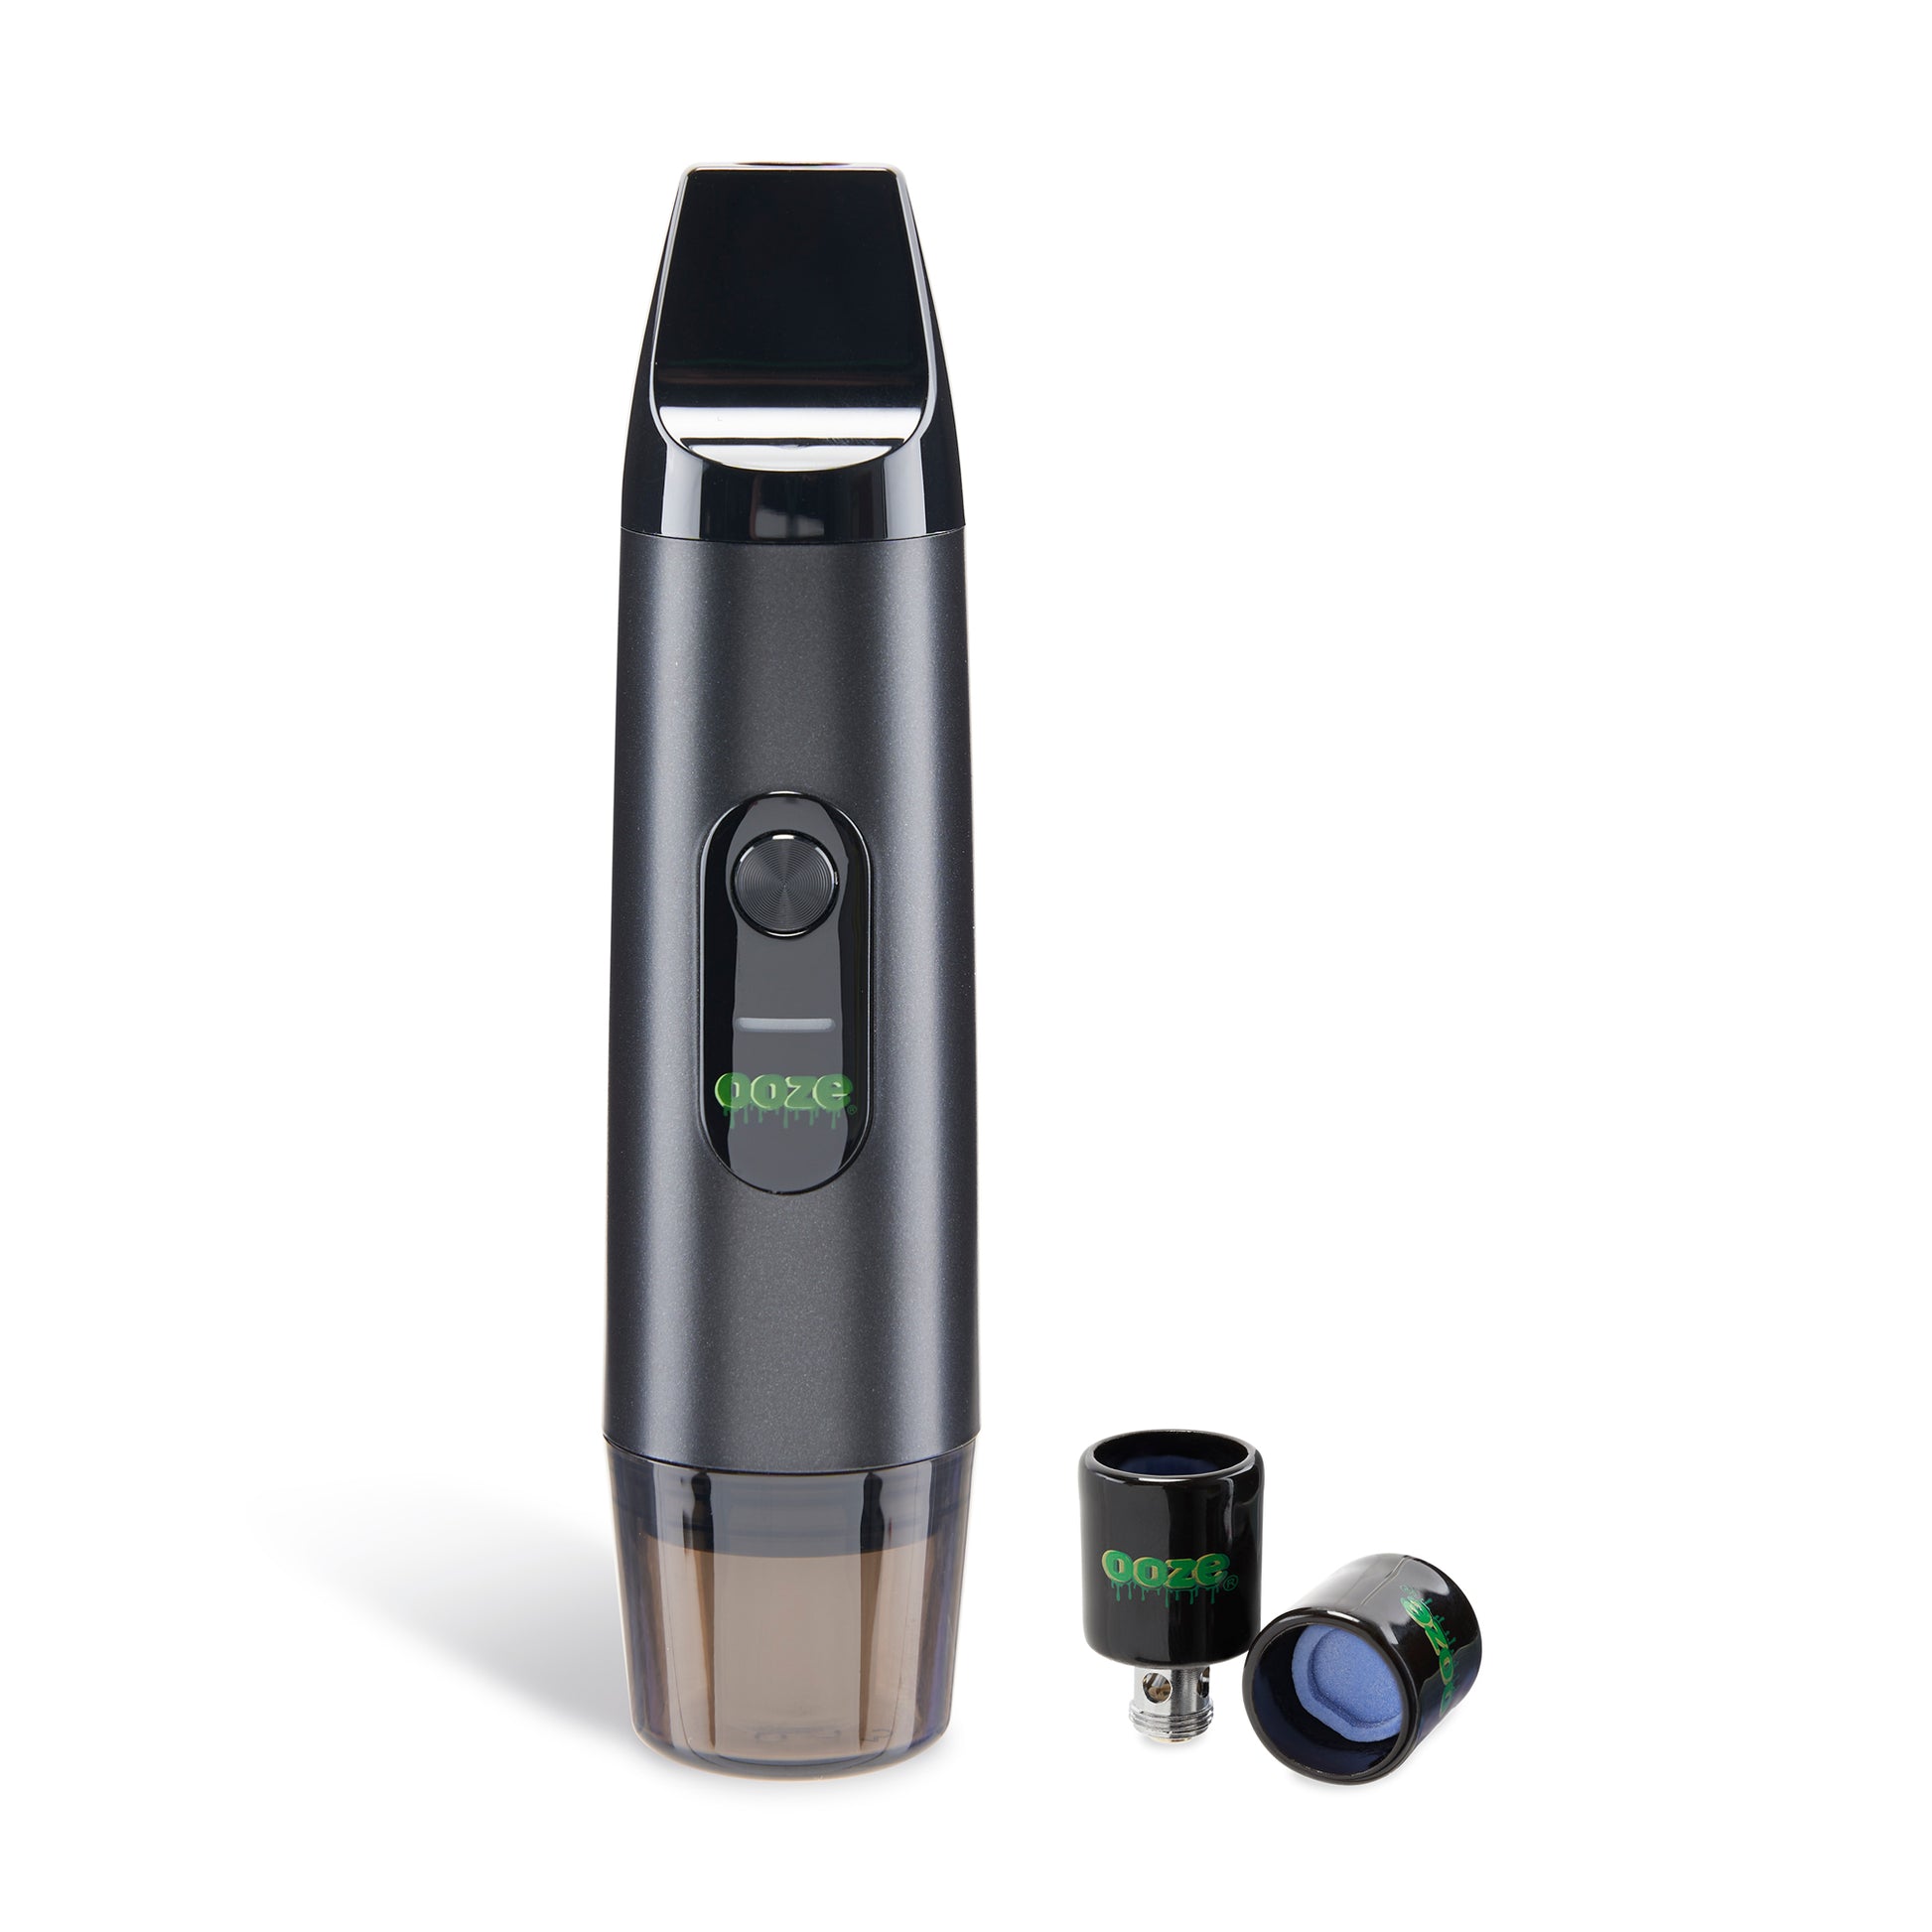 The Panther Black Ooze Booster Extract Vaporizer is shown standing upright as a handheld vape with the cap attached. To the right are two extra Onyx Atomizers.